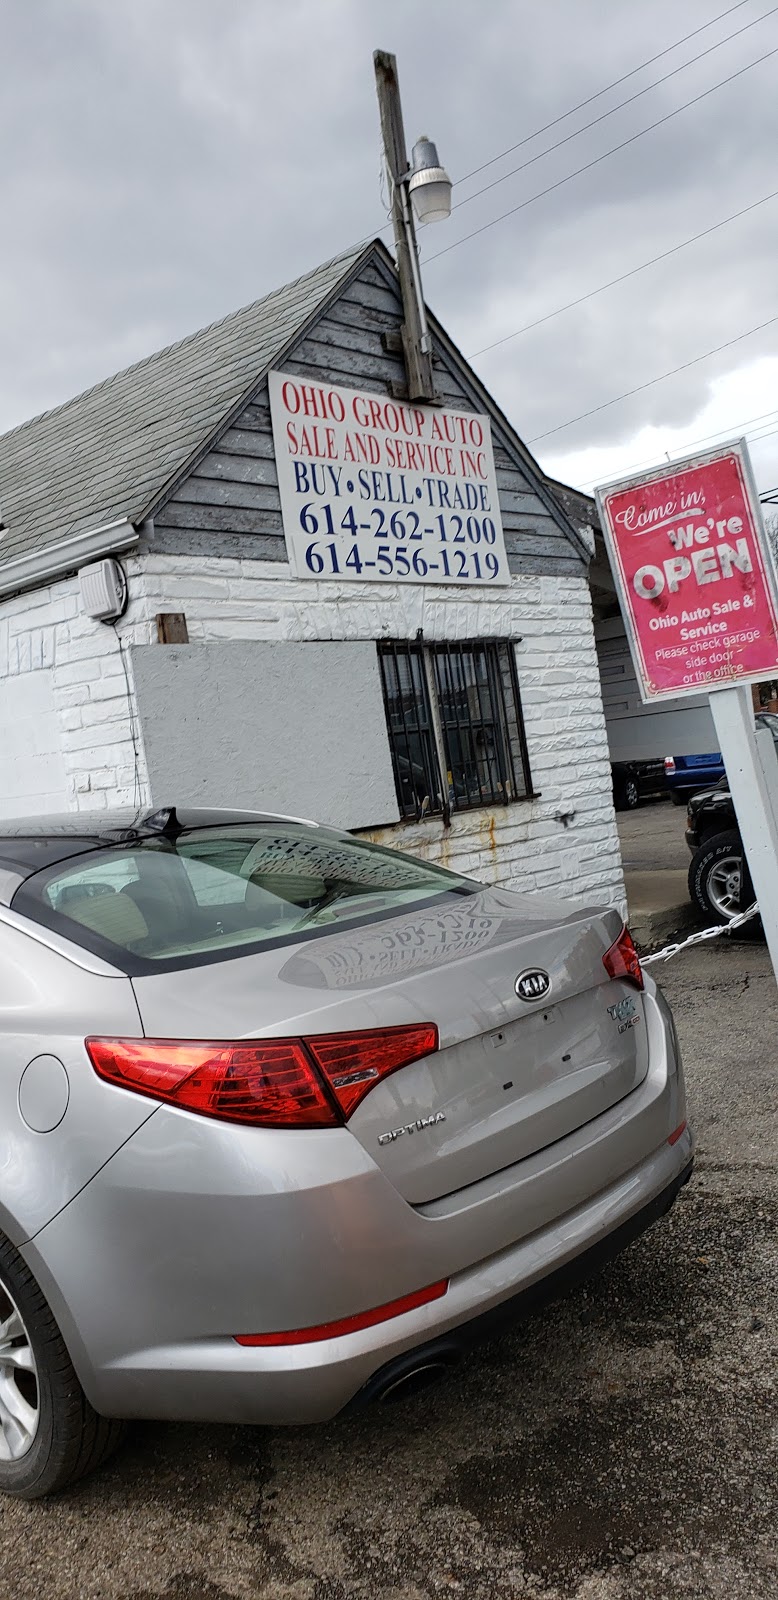 OHIO GROUP AUTO SALE AND SERVICE INC | 2276 Cleveland Ave, Columbus, OH 43211 | Phone: (614) 556-1219